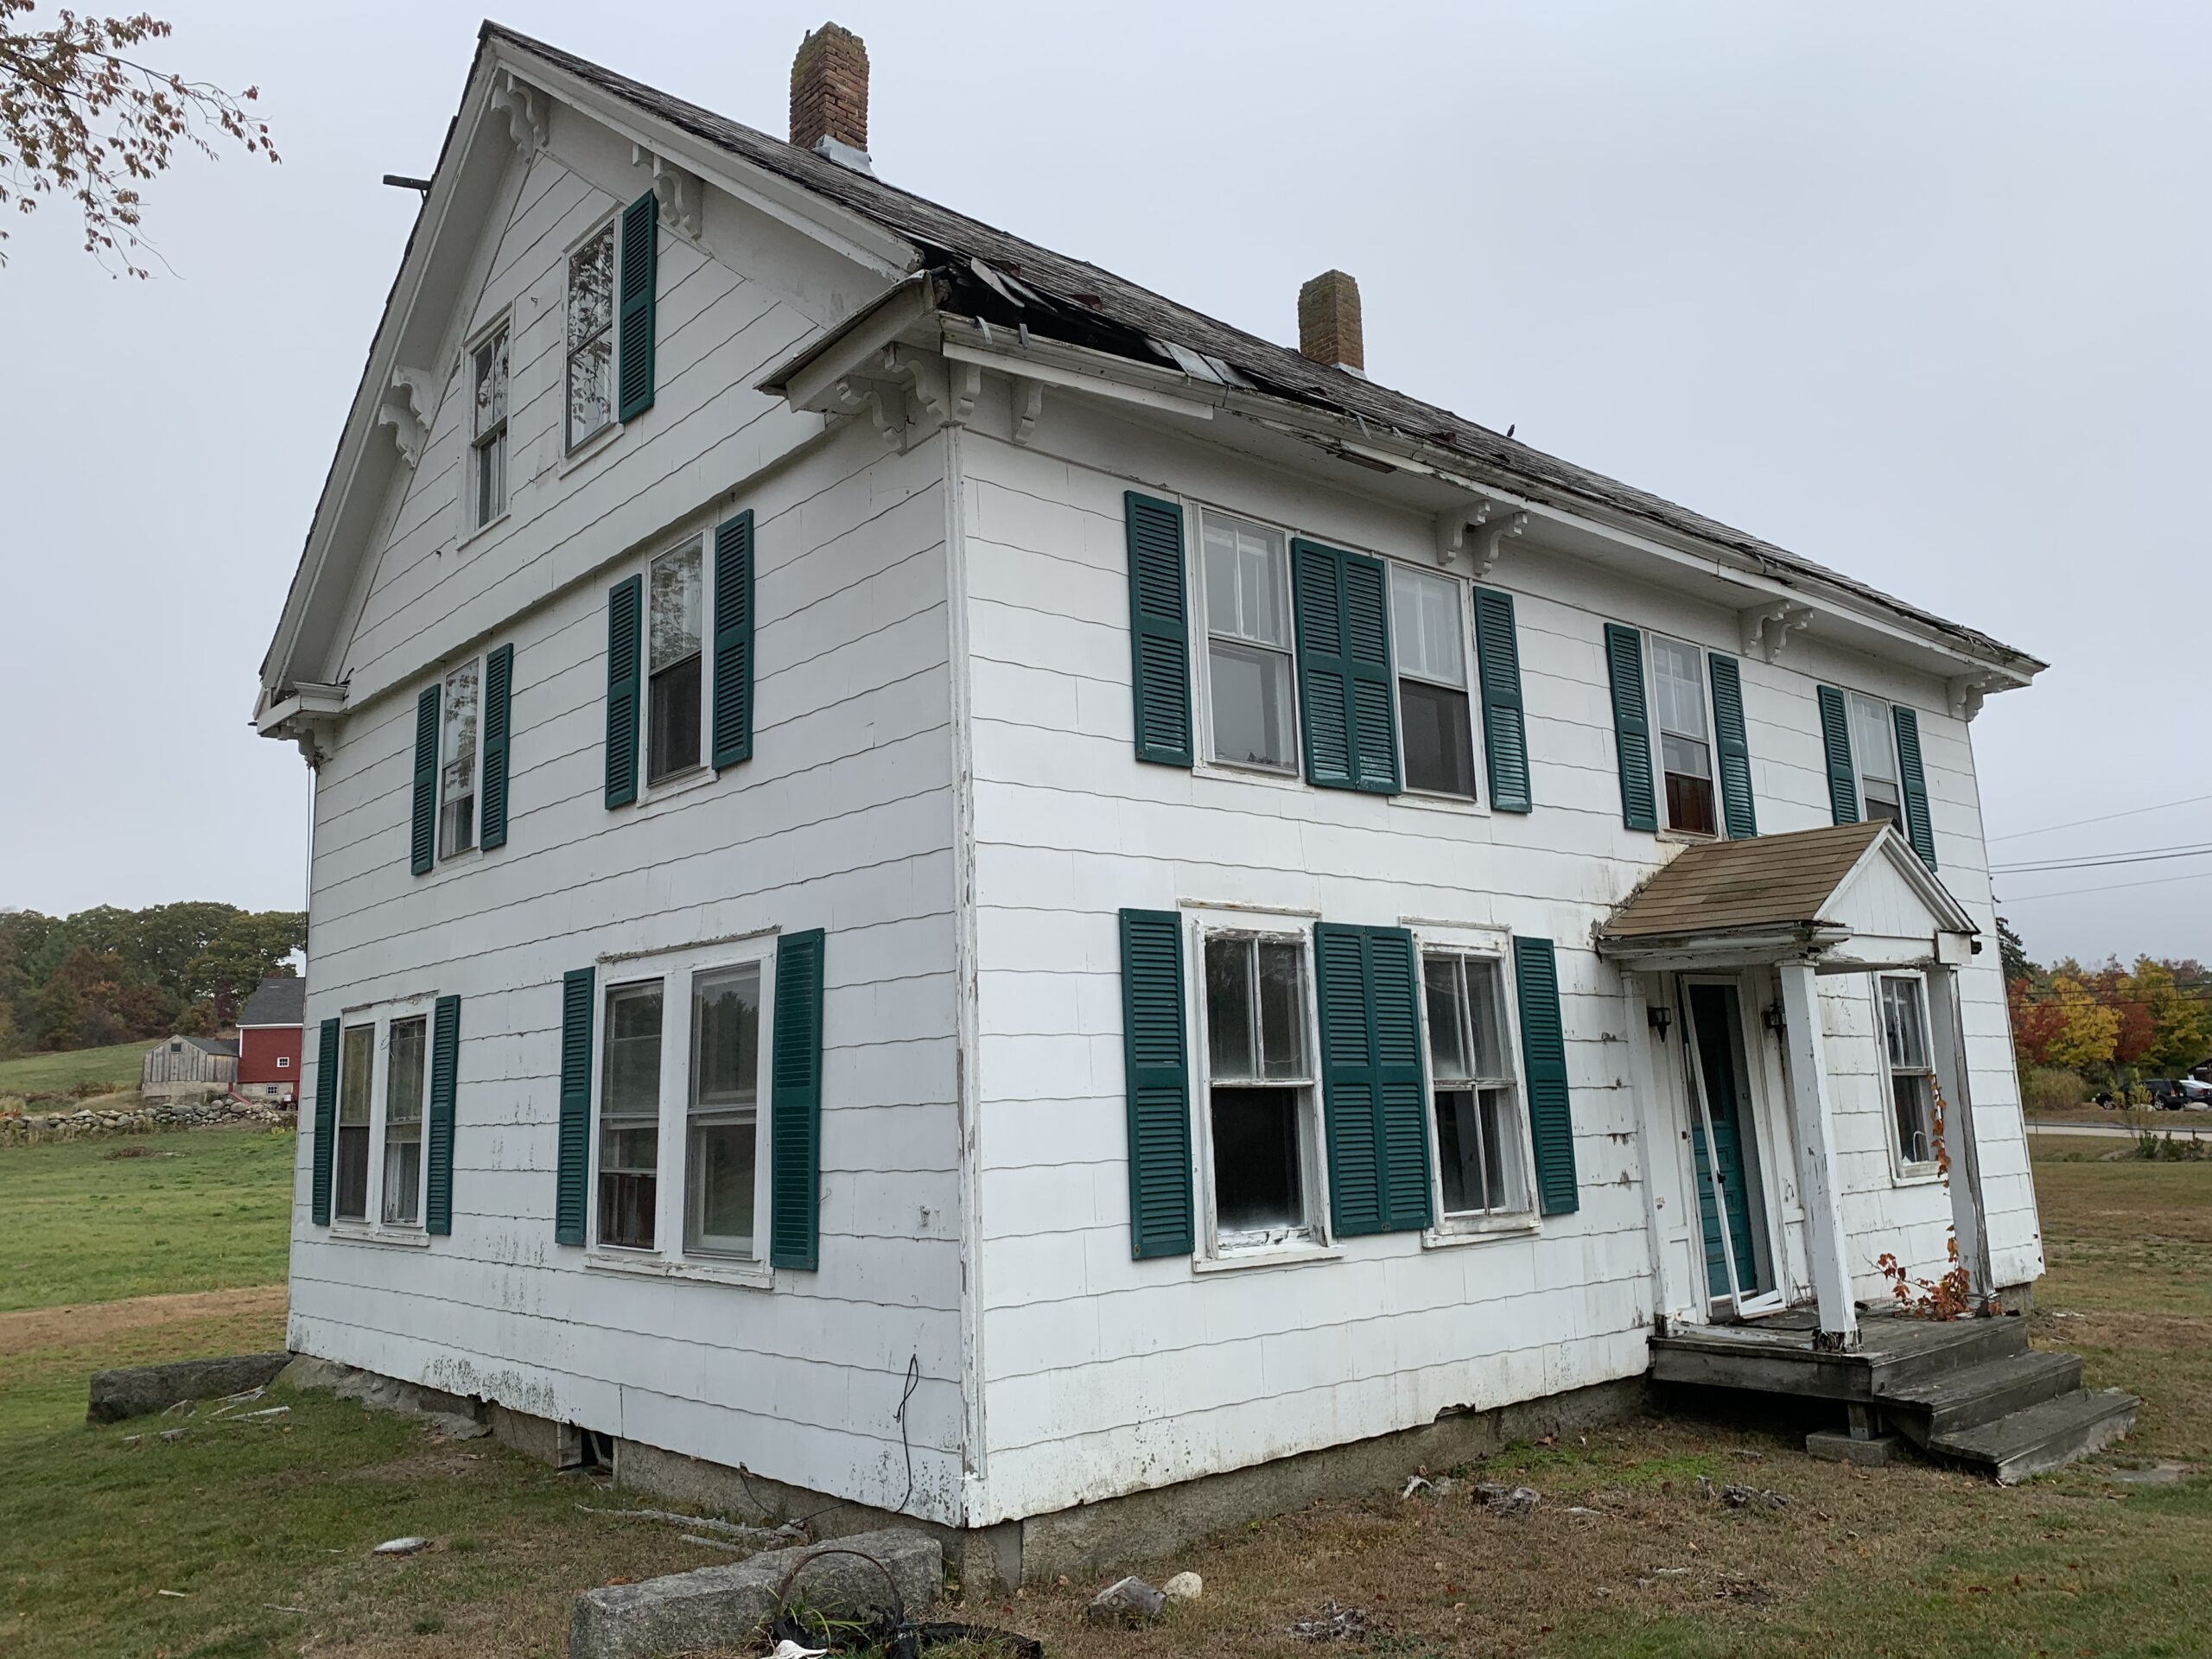 Planning Board roundup: Plans discussed for historic home at 83 East Main; Frankland Road solar decommissioning plan approved